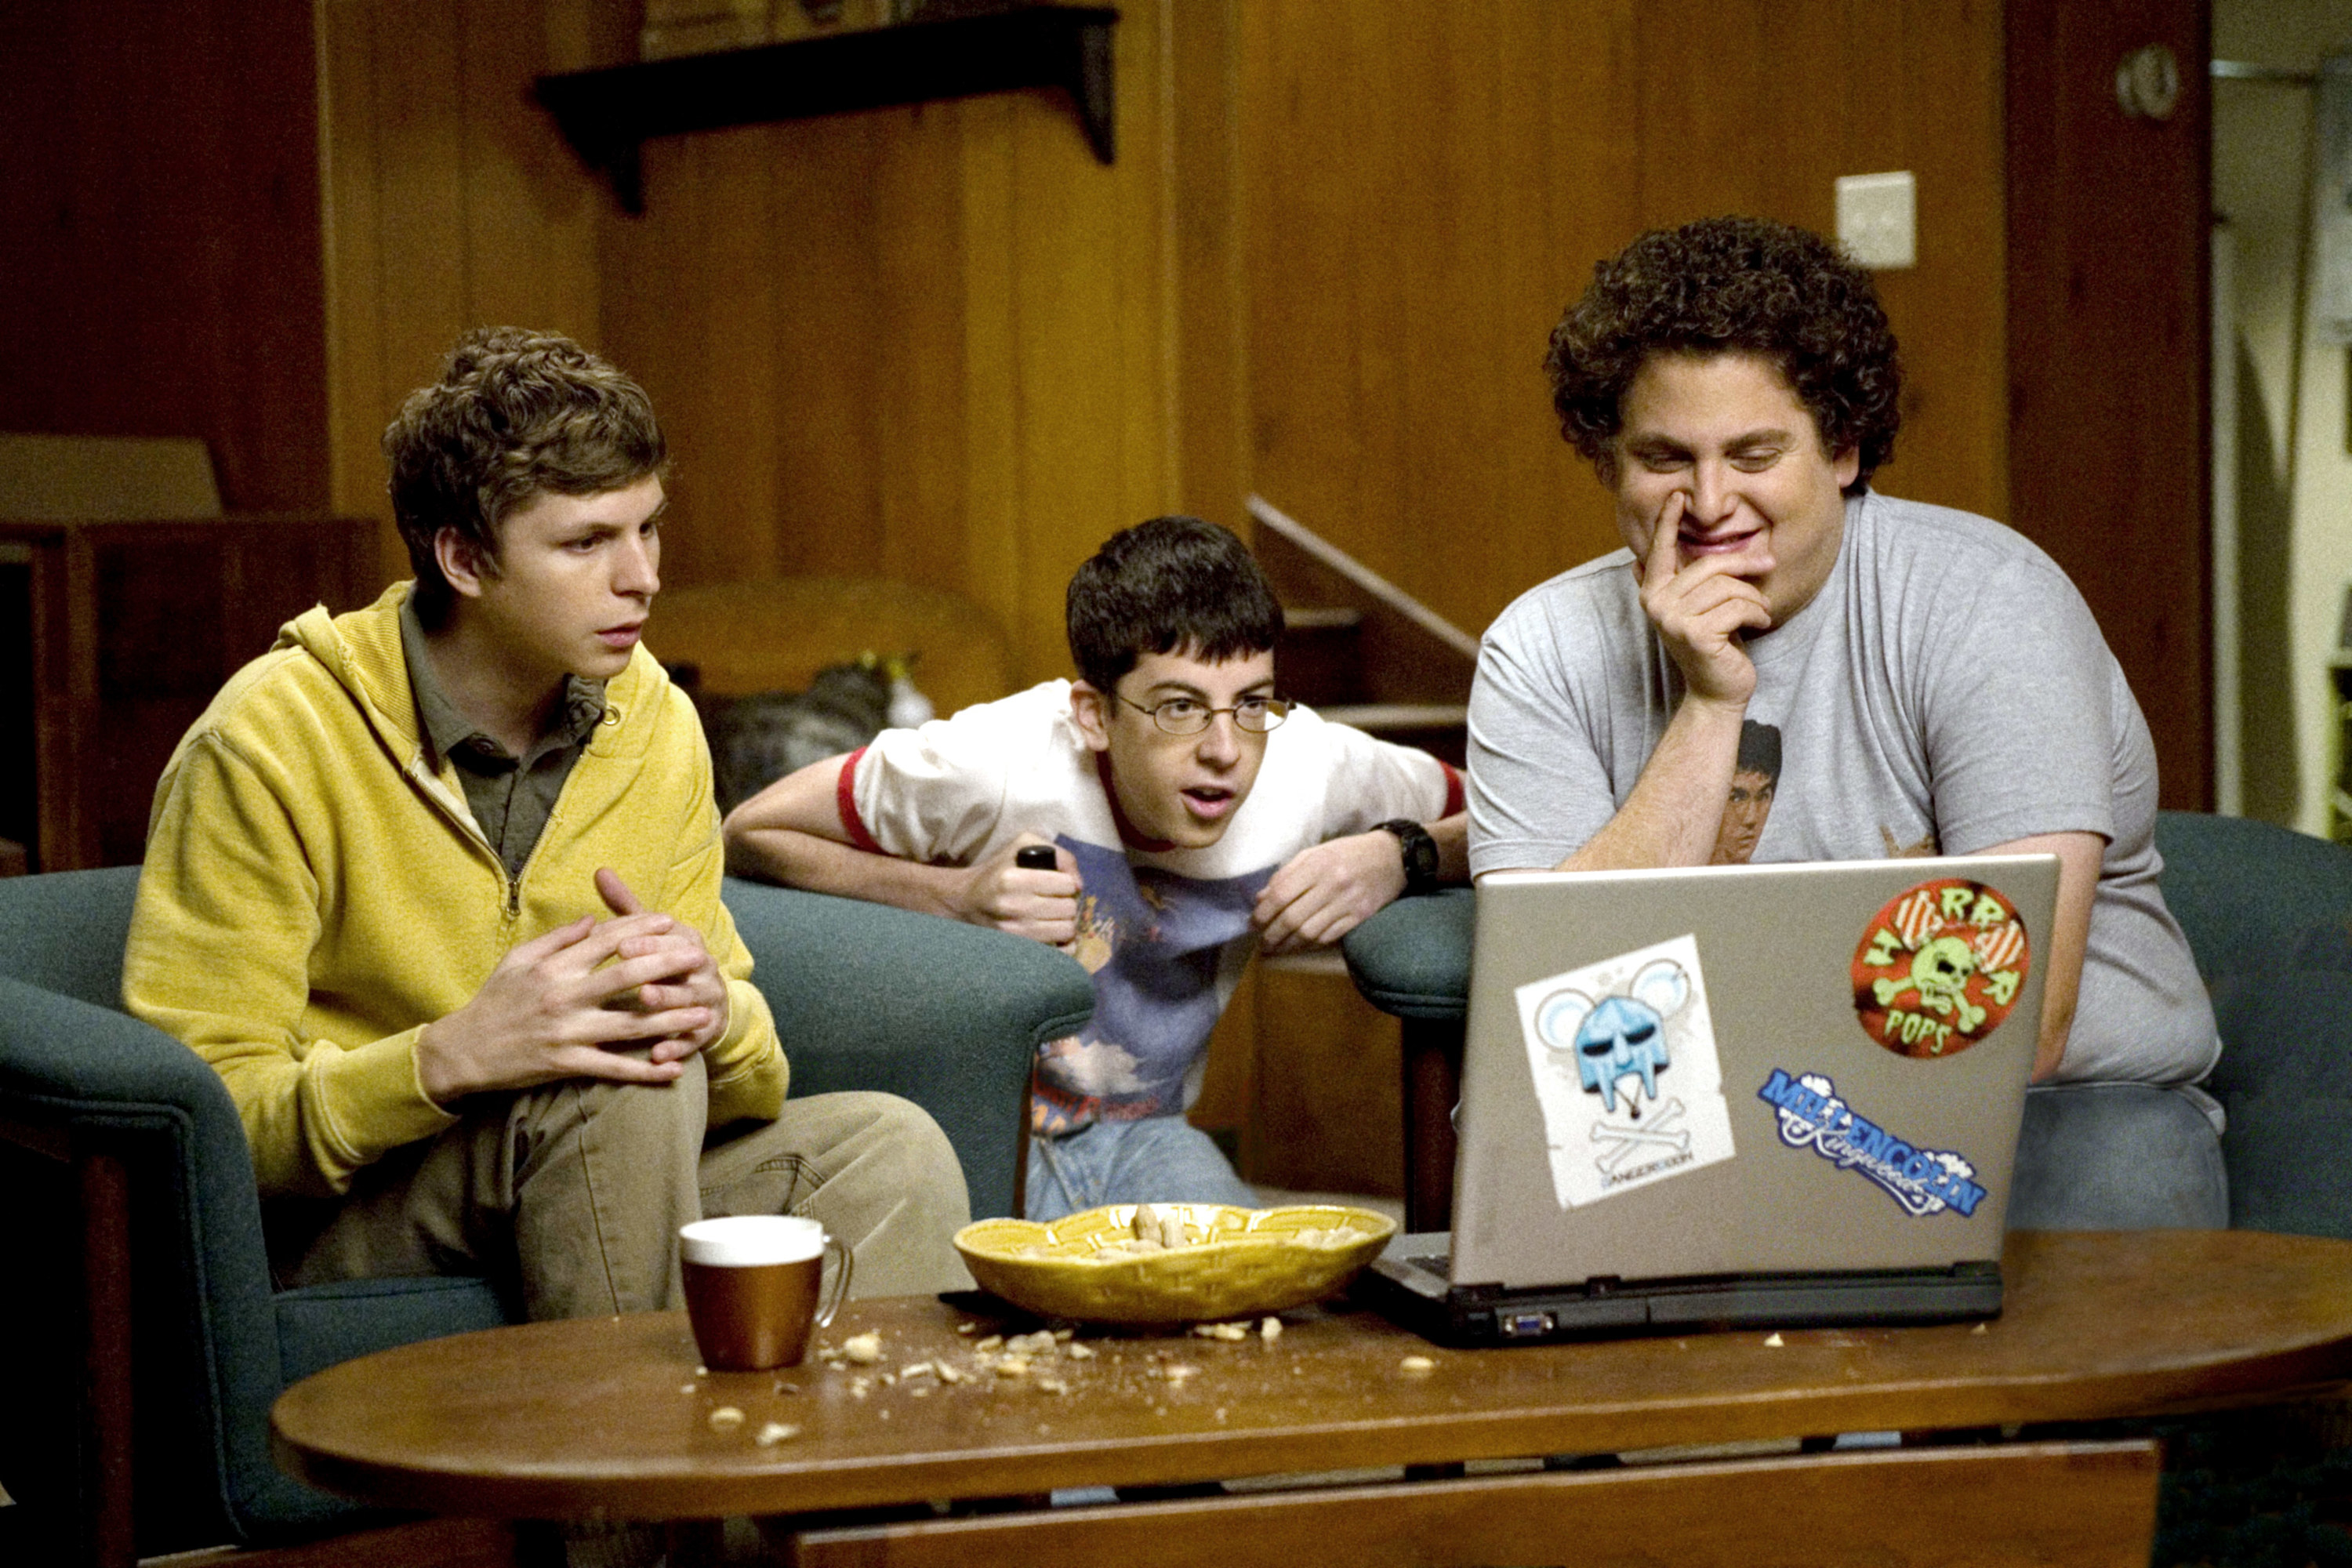 Jonah, Christopher and Michael look at a computer screen in the movie